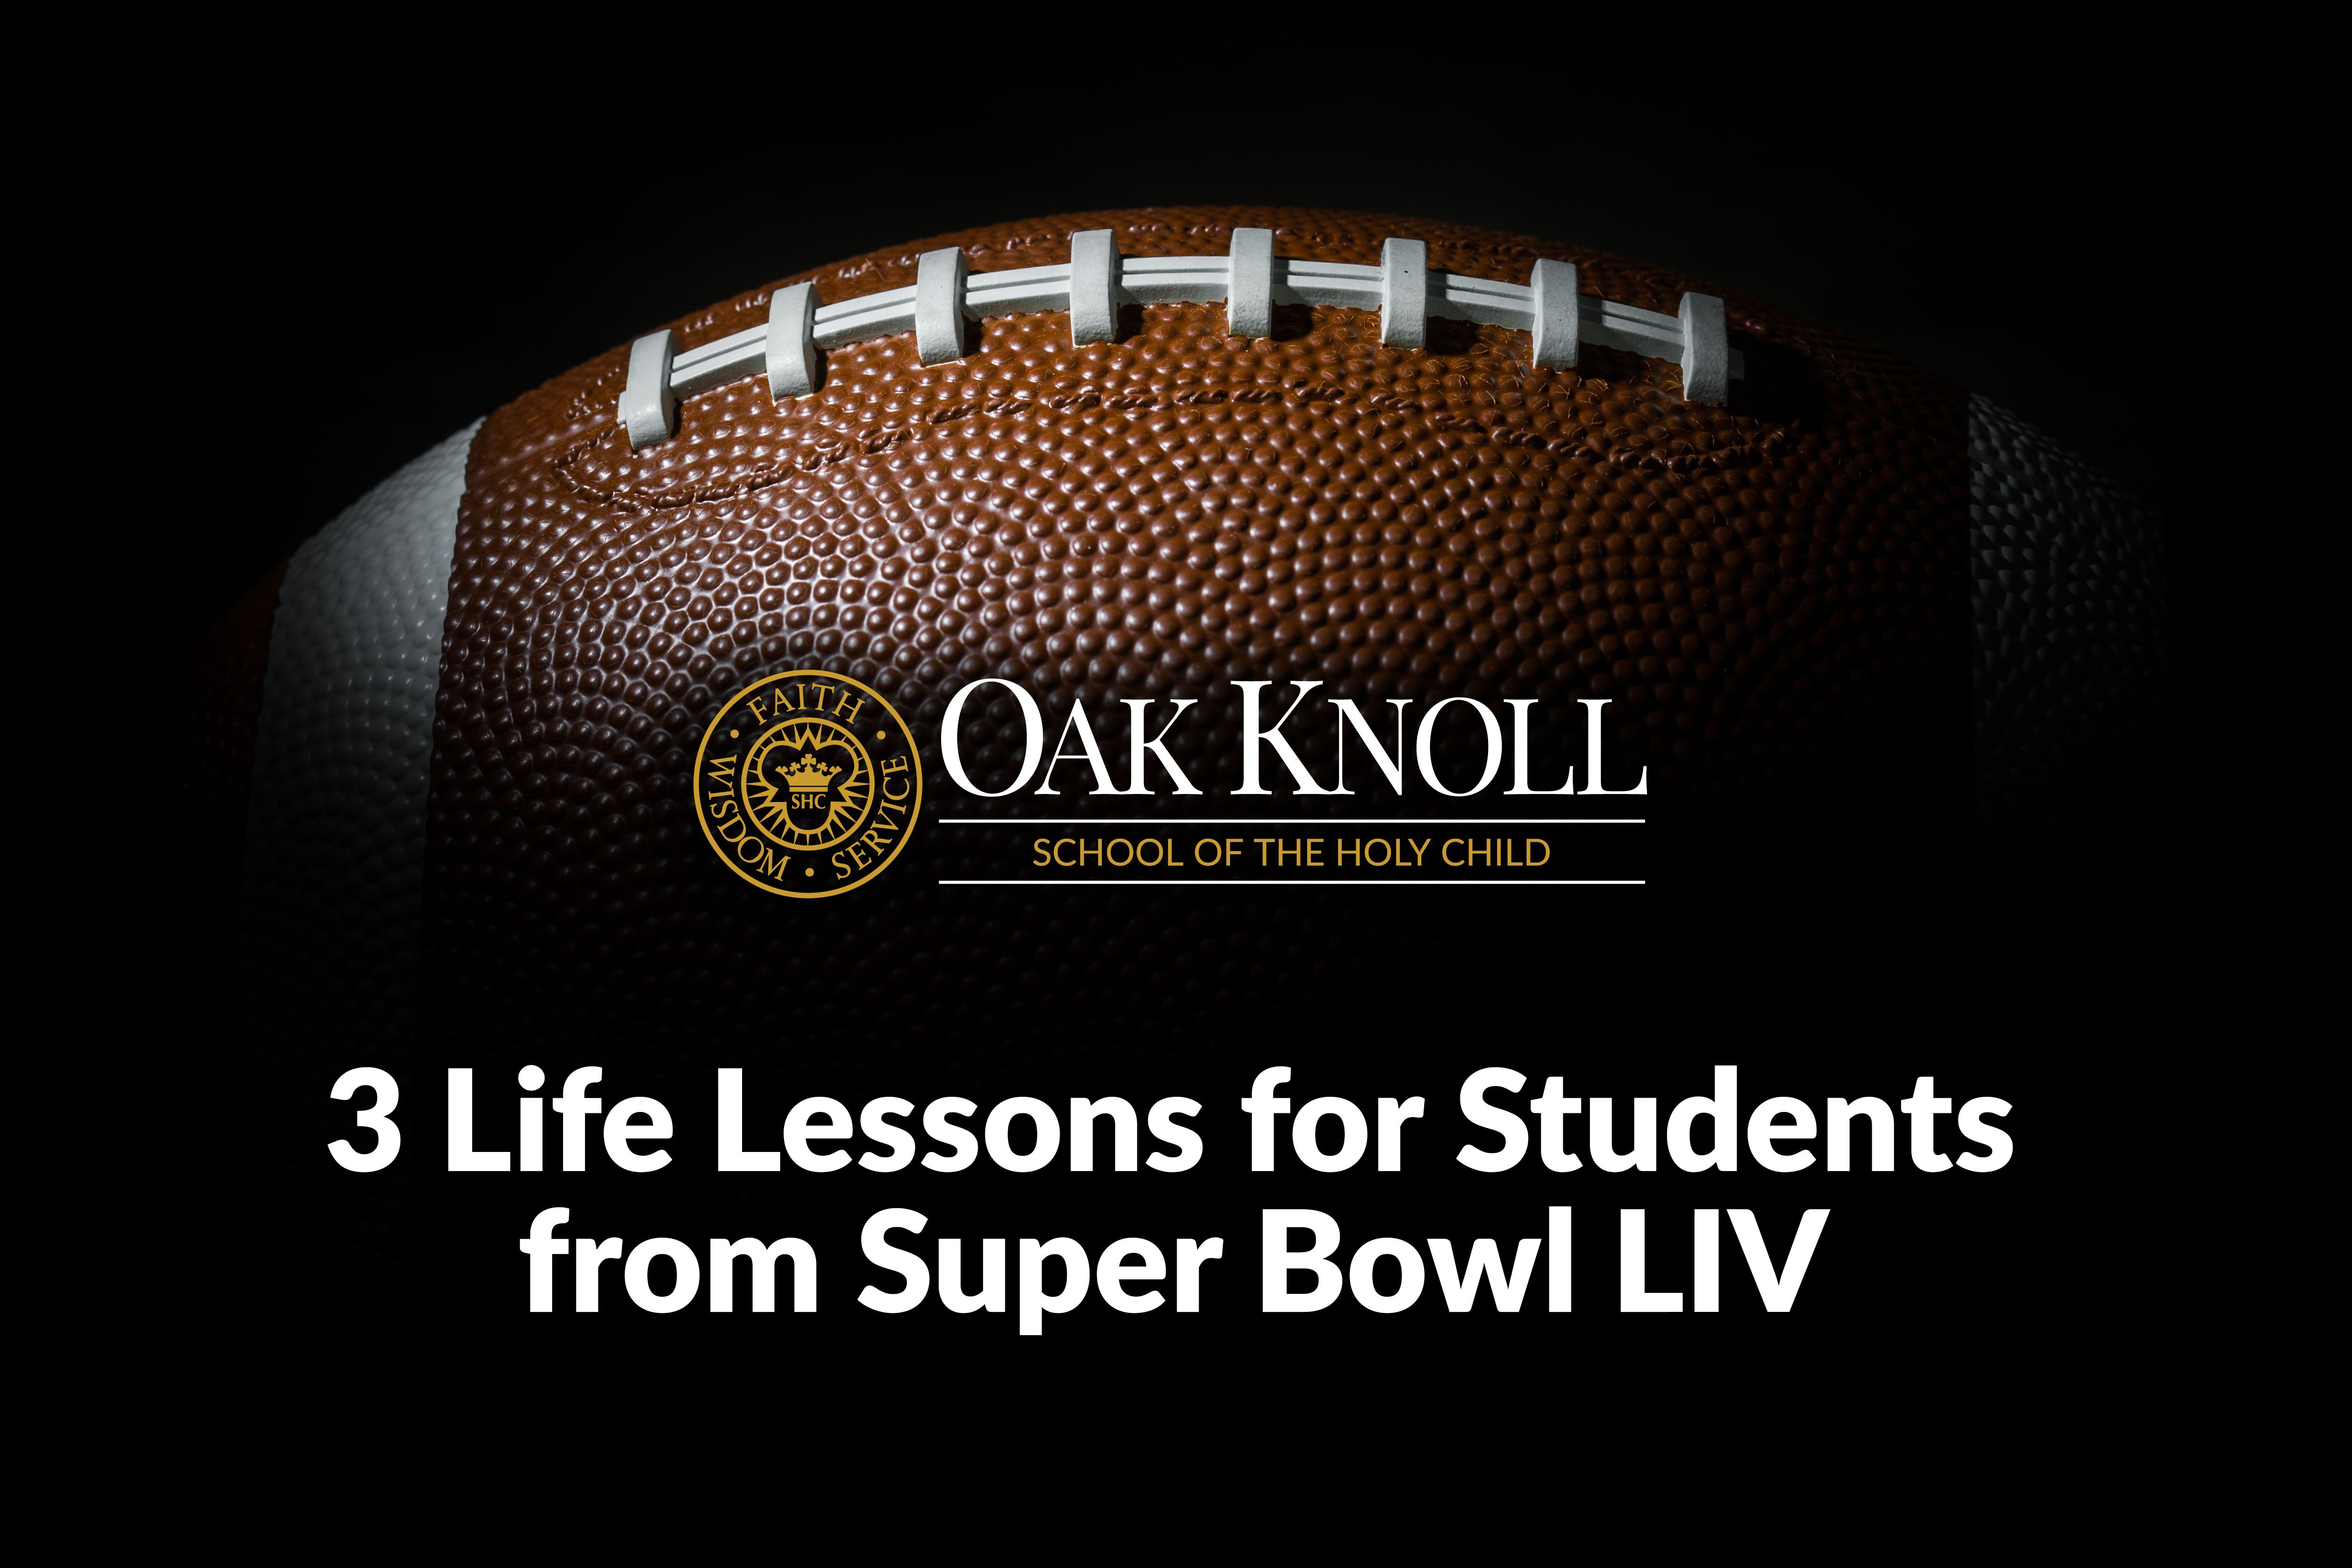 3 Life Lessons for Students from Super Bowl LIV